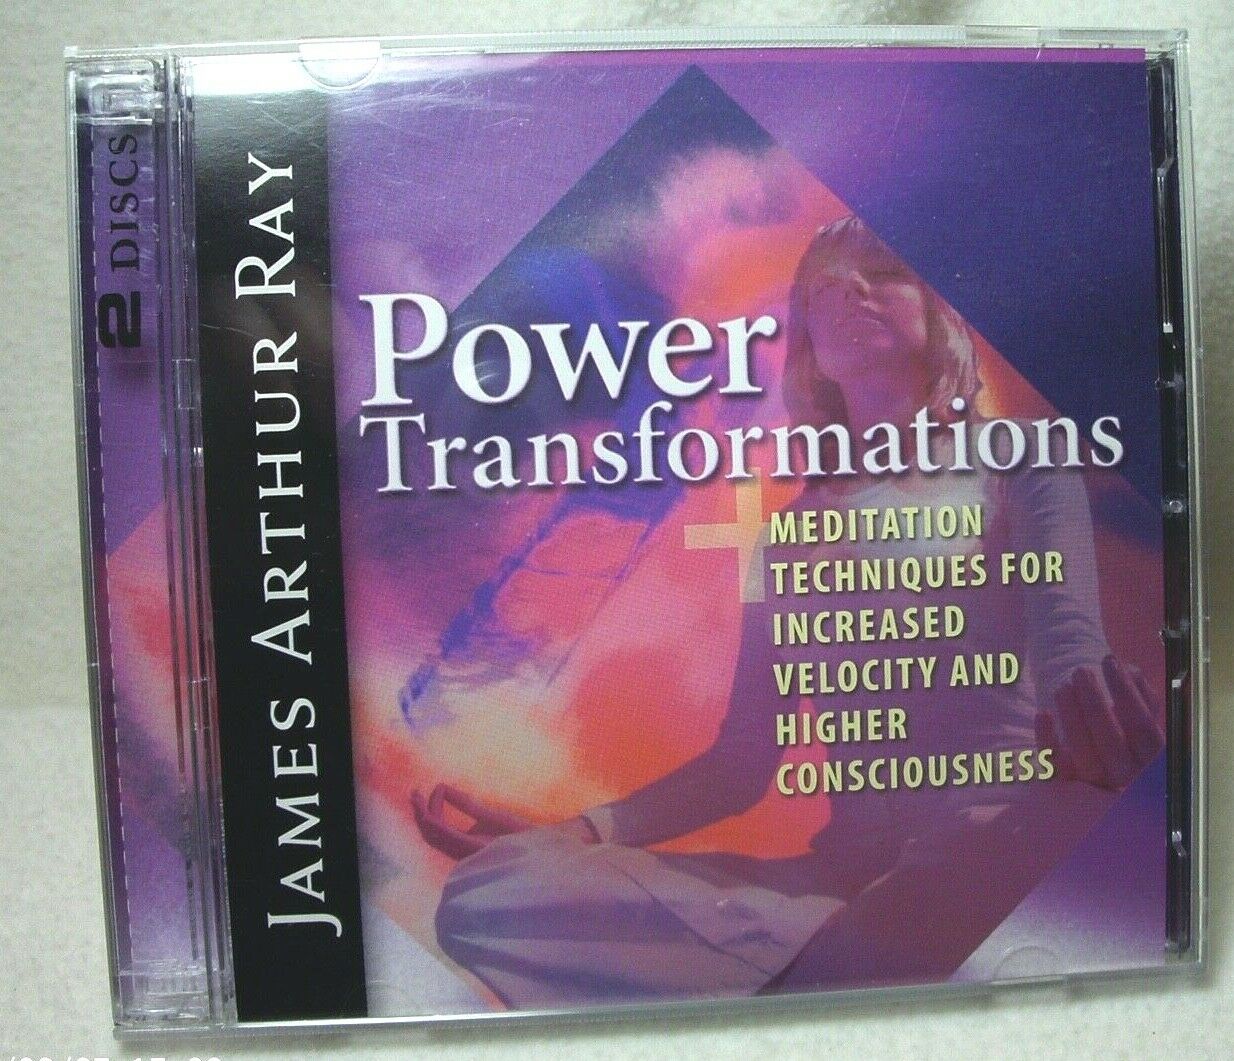 Power Transformations By James Arthur Ray 2 Cd Set In Case Rare! 2007